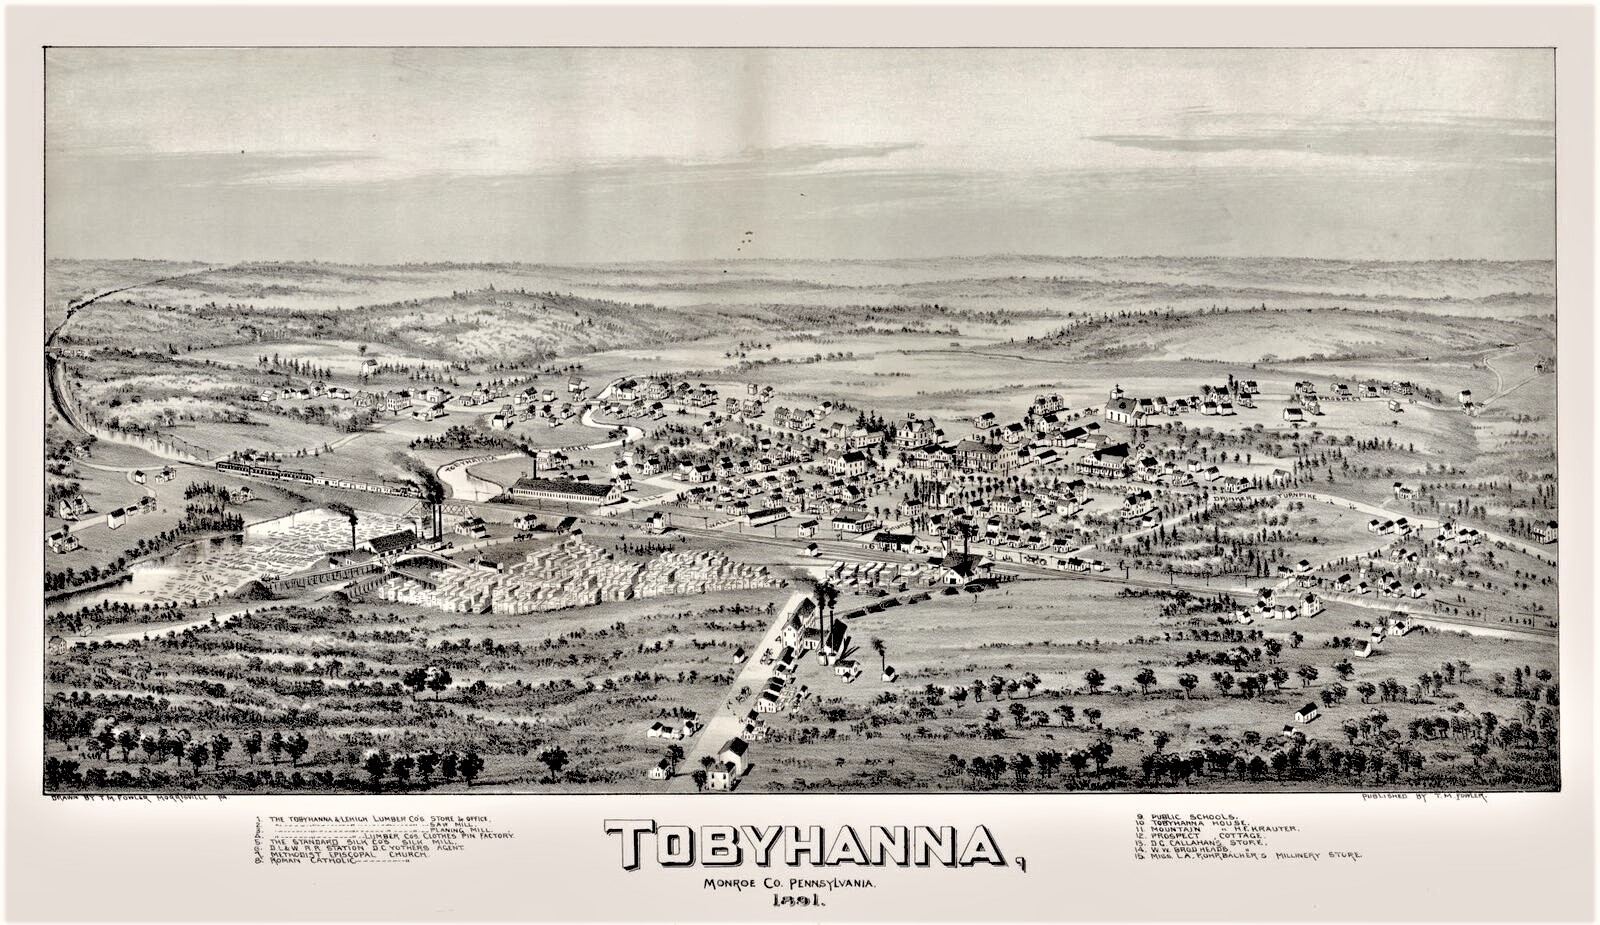 “Tobyhanna” is an Indian name meaning “dark waters” or “alder bottom.” It got this name from the amount of tannic acid from leaves which turns lake and streems to the color of tea. Tobyhanna was first named Naglesville in honor of George Nagle of Philaelphia. He opened the first store and built a small water-powered sawmill about 1840. By 1845, the town consisted of six or seven dwellings, one store, one tavern and two sawmills. By 1865, Tobyhanna was the largest village in this area of the country, pleasantly located near the center of Coolbaugh Township. This map is dated 1891.